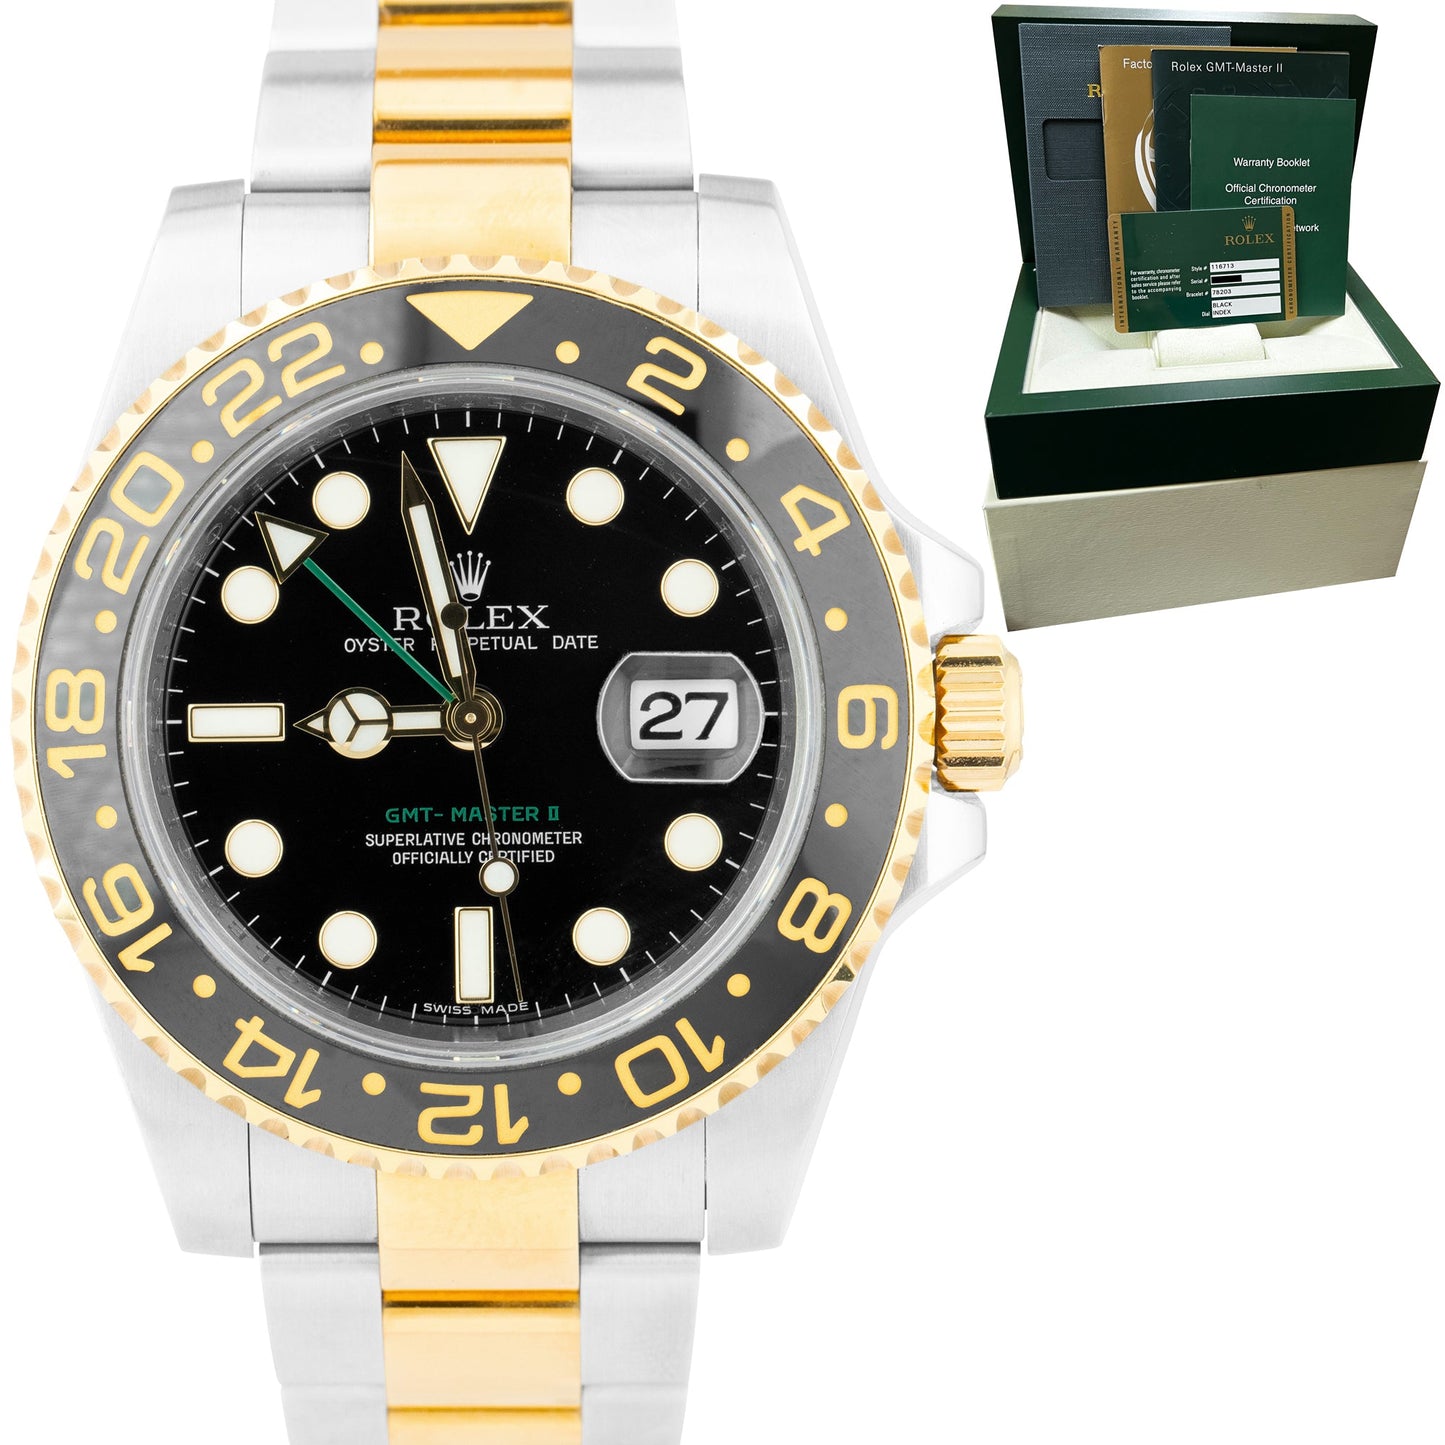 2012 Rolex GMT-Master II Ceramic 116713 Black Two-Tone Stainless 40mm Watch B+P